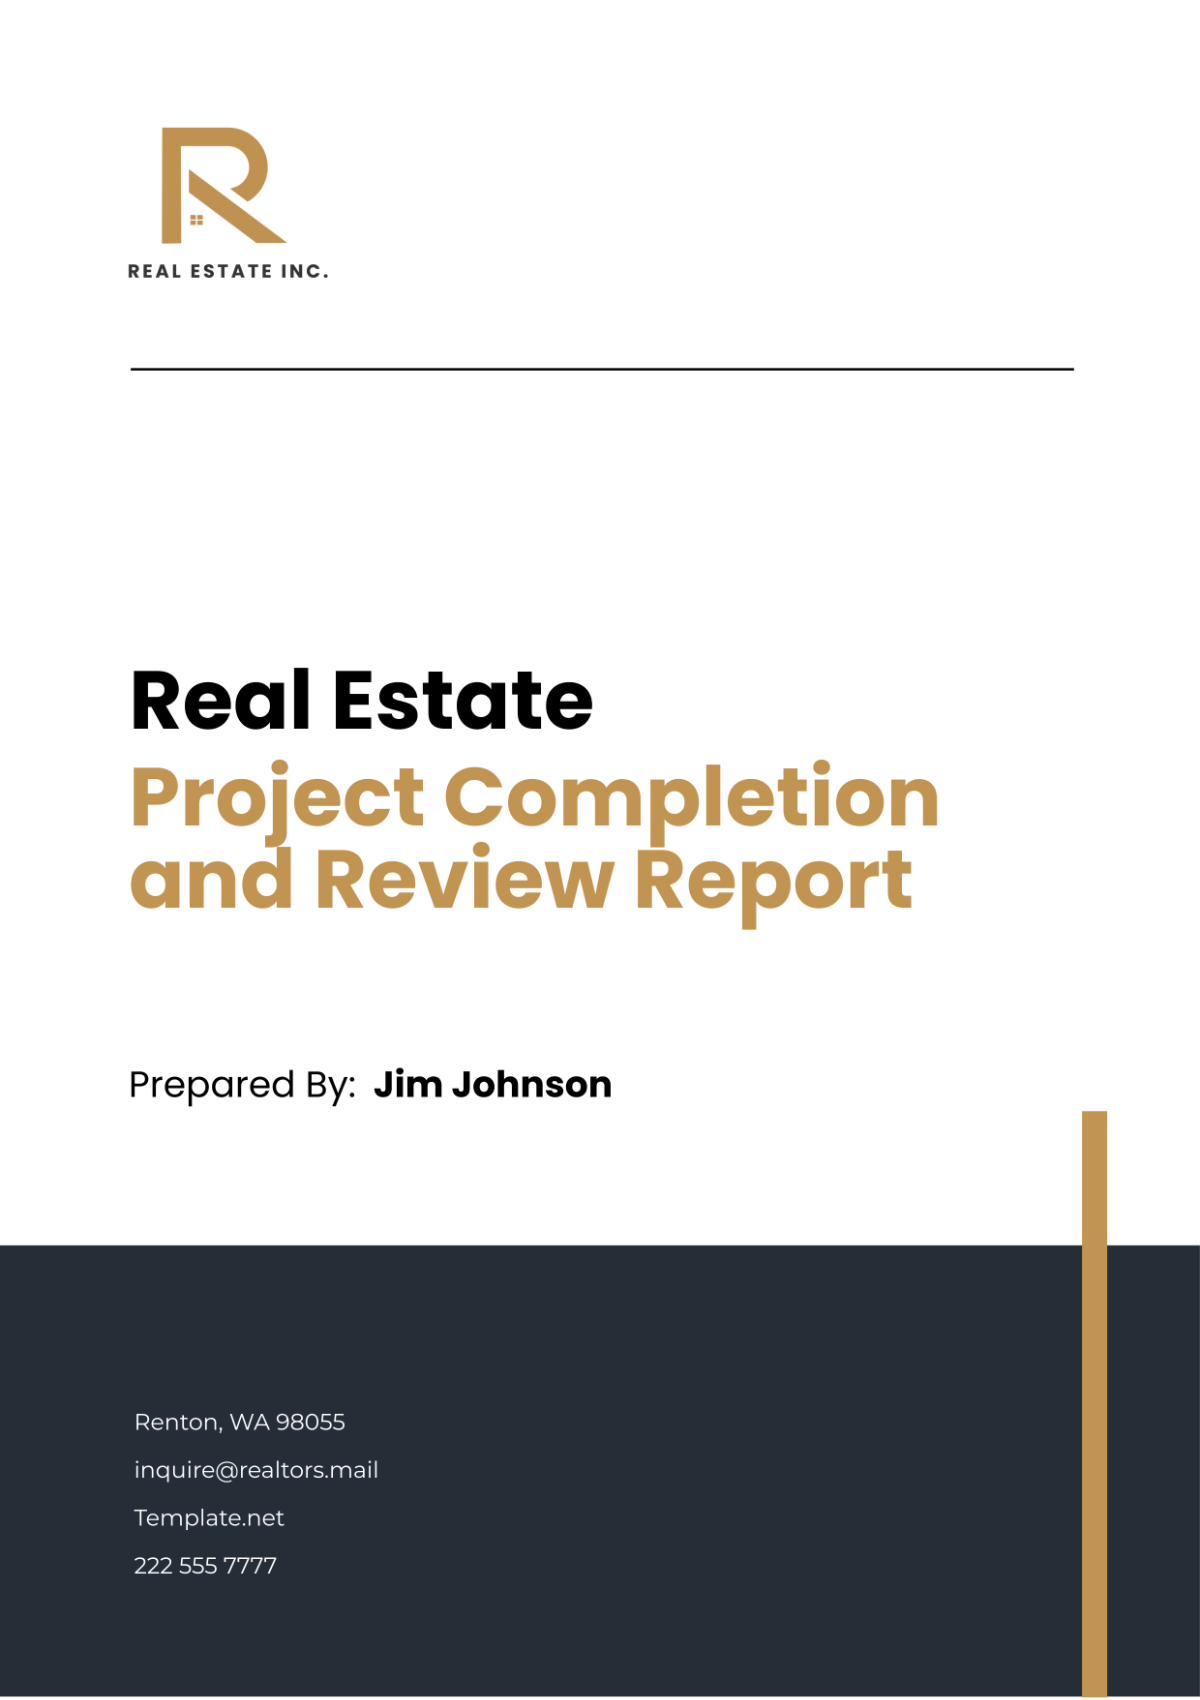 Free Real Estate Project Completion and Review Report Template